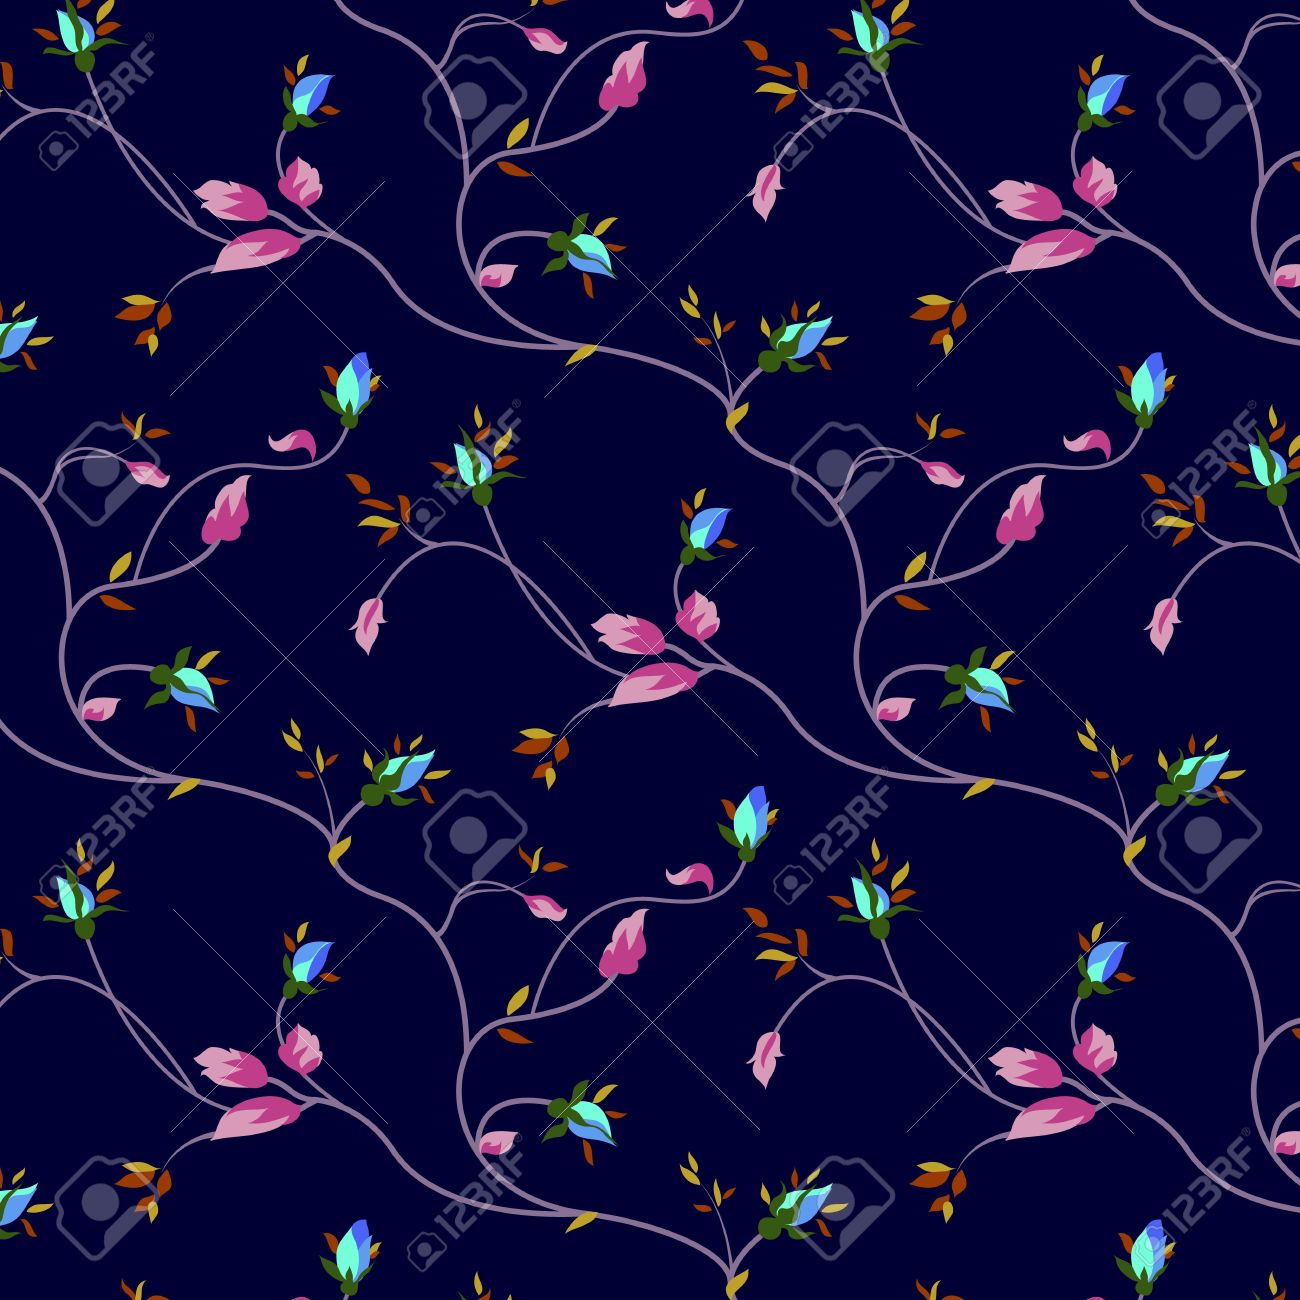 Rosebuds And Leaves On A Ultramarine Background Royalty